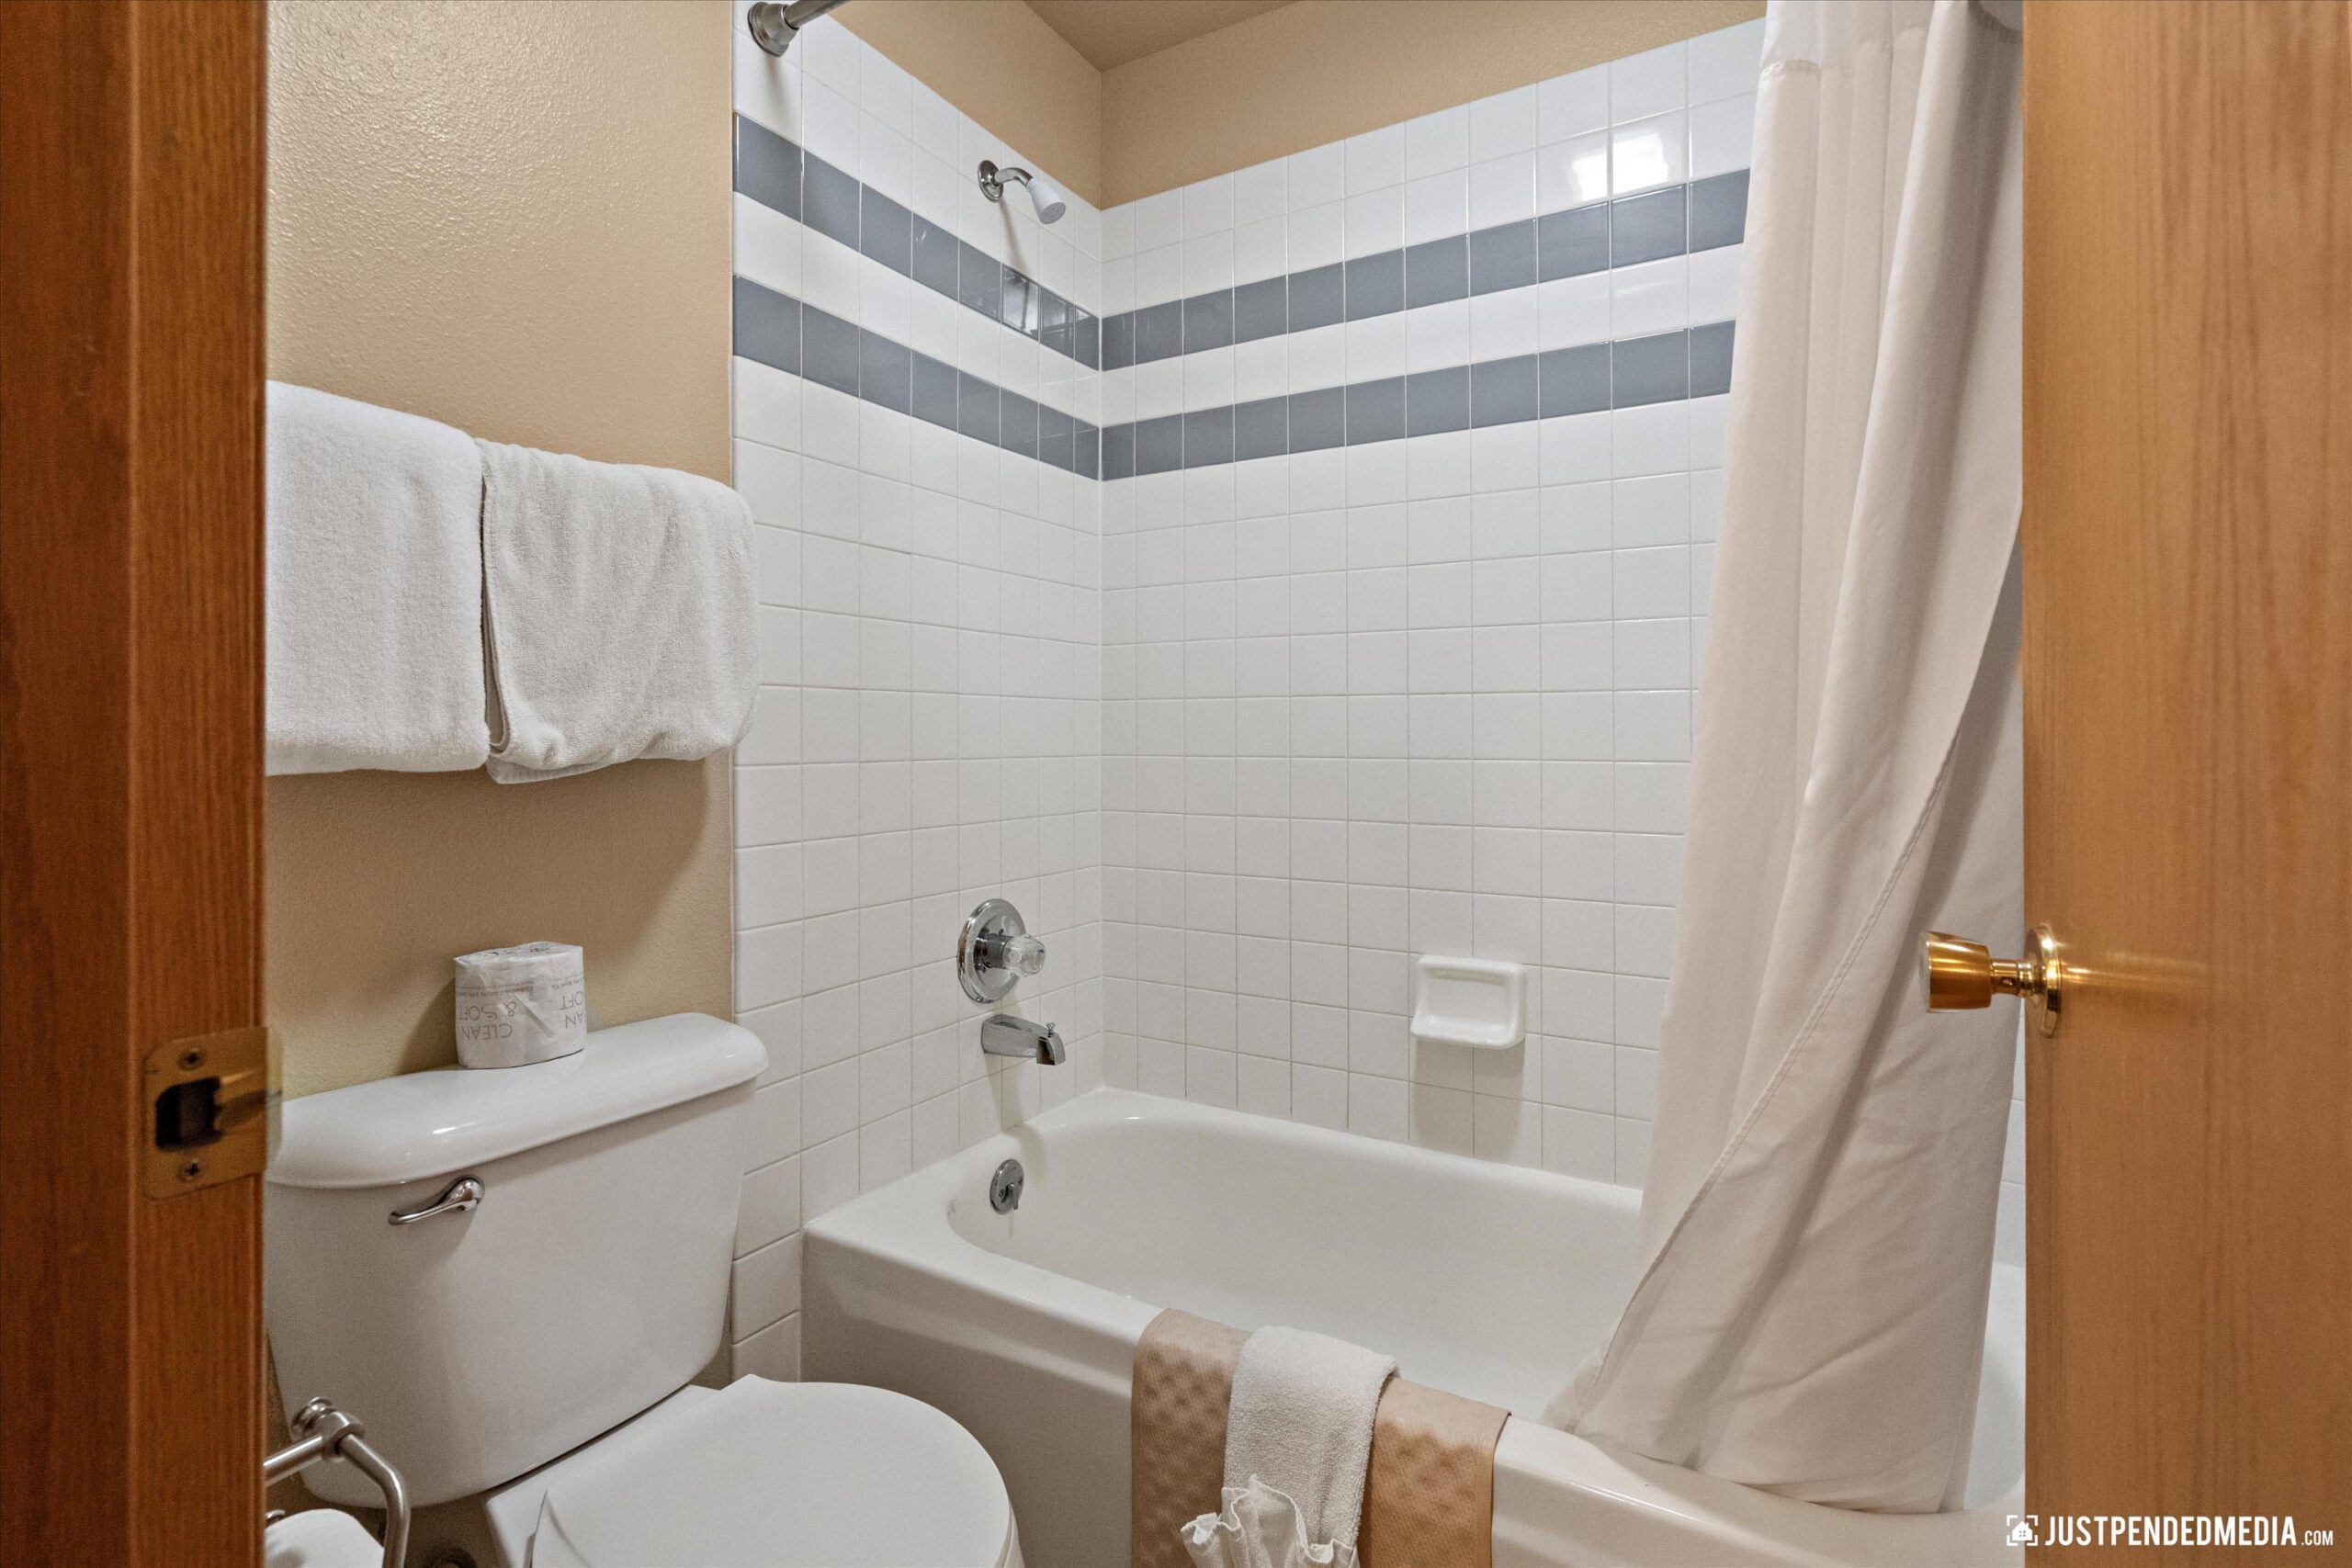 A clean a modern bathroom with linens and tiled shower